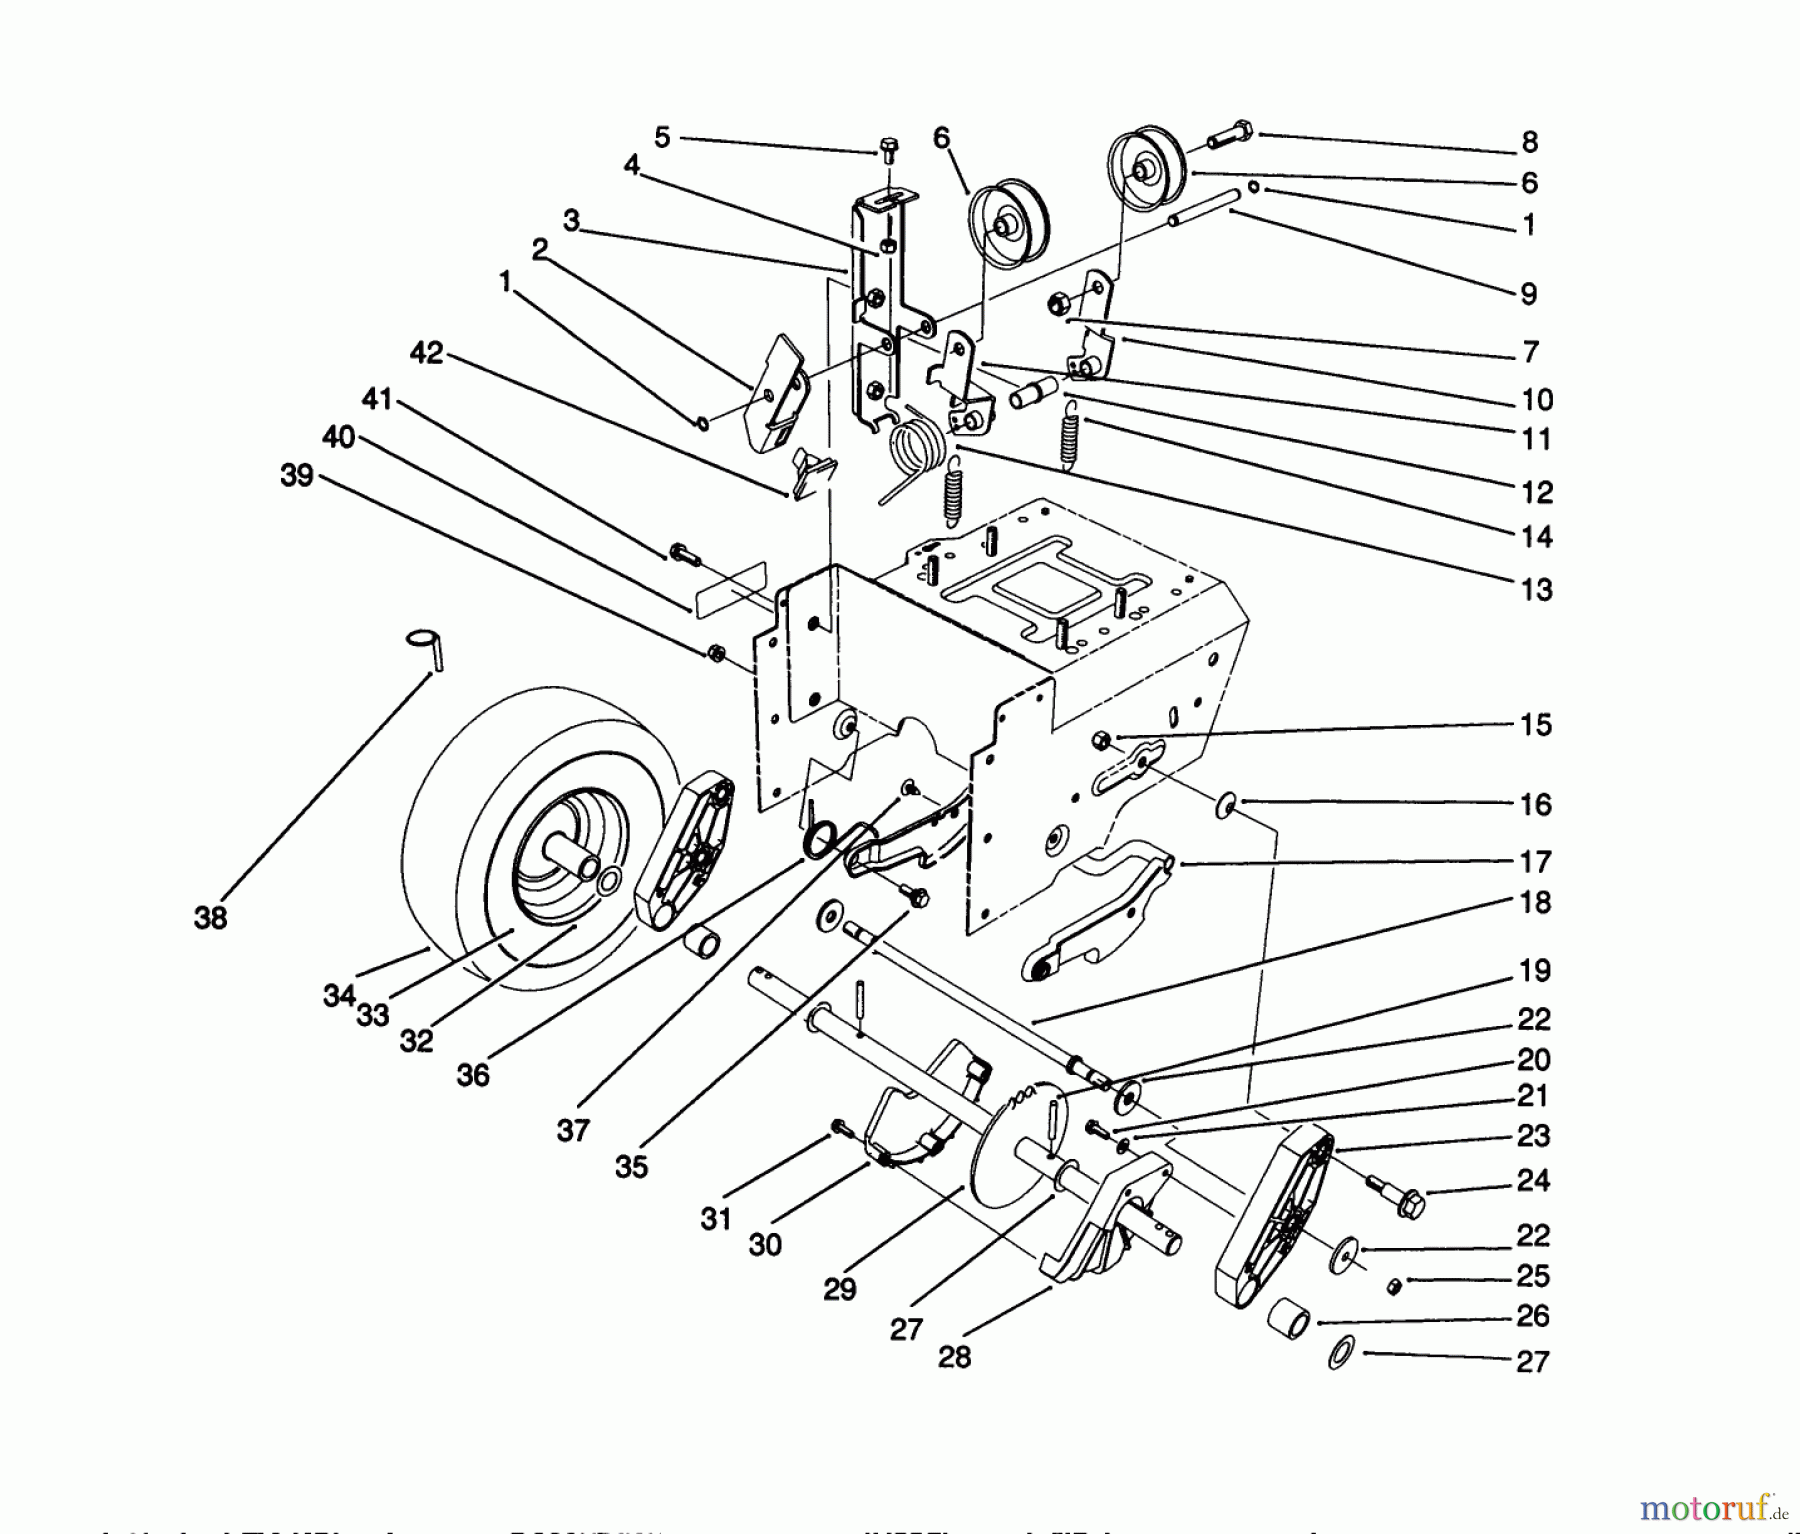  Toro Neu Snow Blowers/Snow Throwers Seite 1 38543 (824) - Toro 824 Power Shift Snowthrower, 1990 (0000001-0999999) TRACTION DRIVE ASSEMBLY